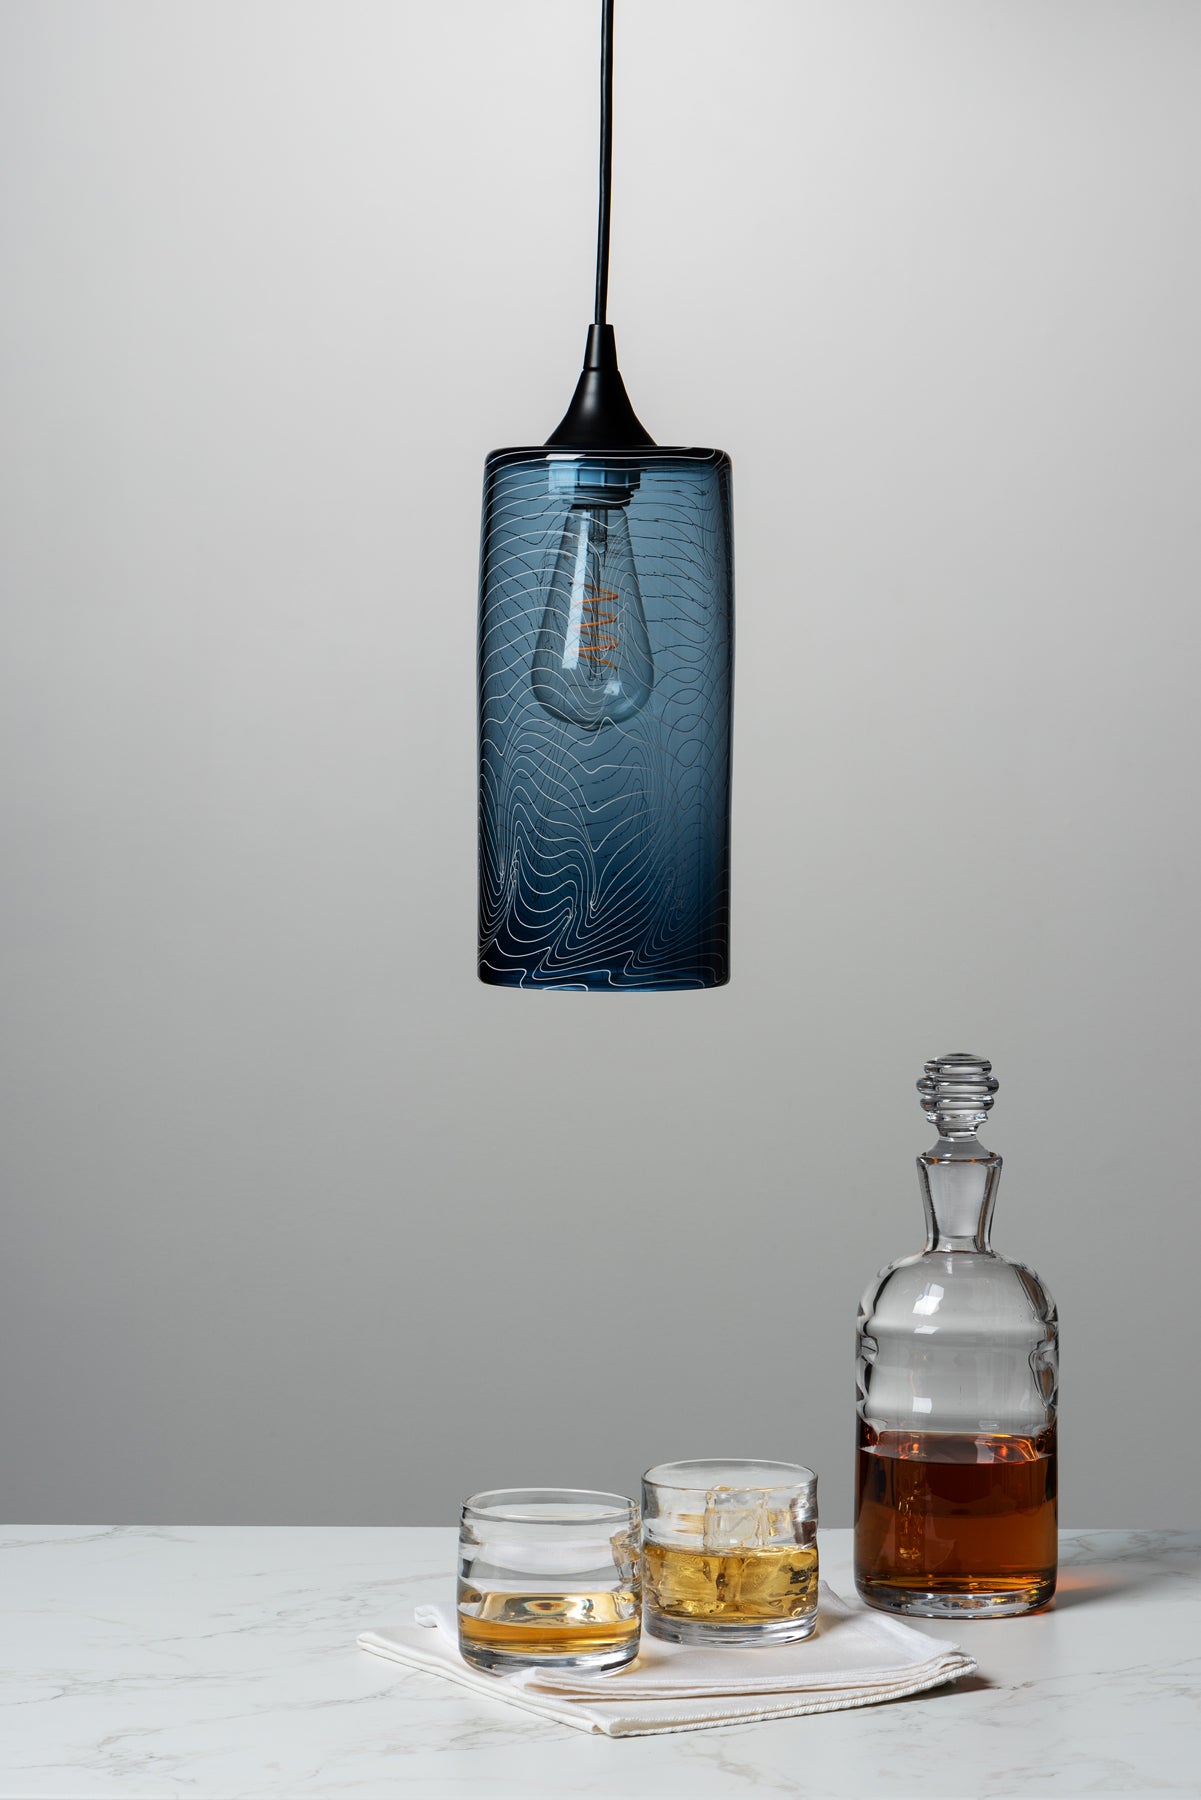 A small batch glass light fixture hangs above a marble table top where a decanter and rocks glasses sit against a grey background. Image by Loam